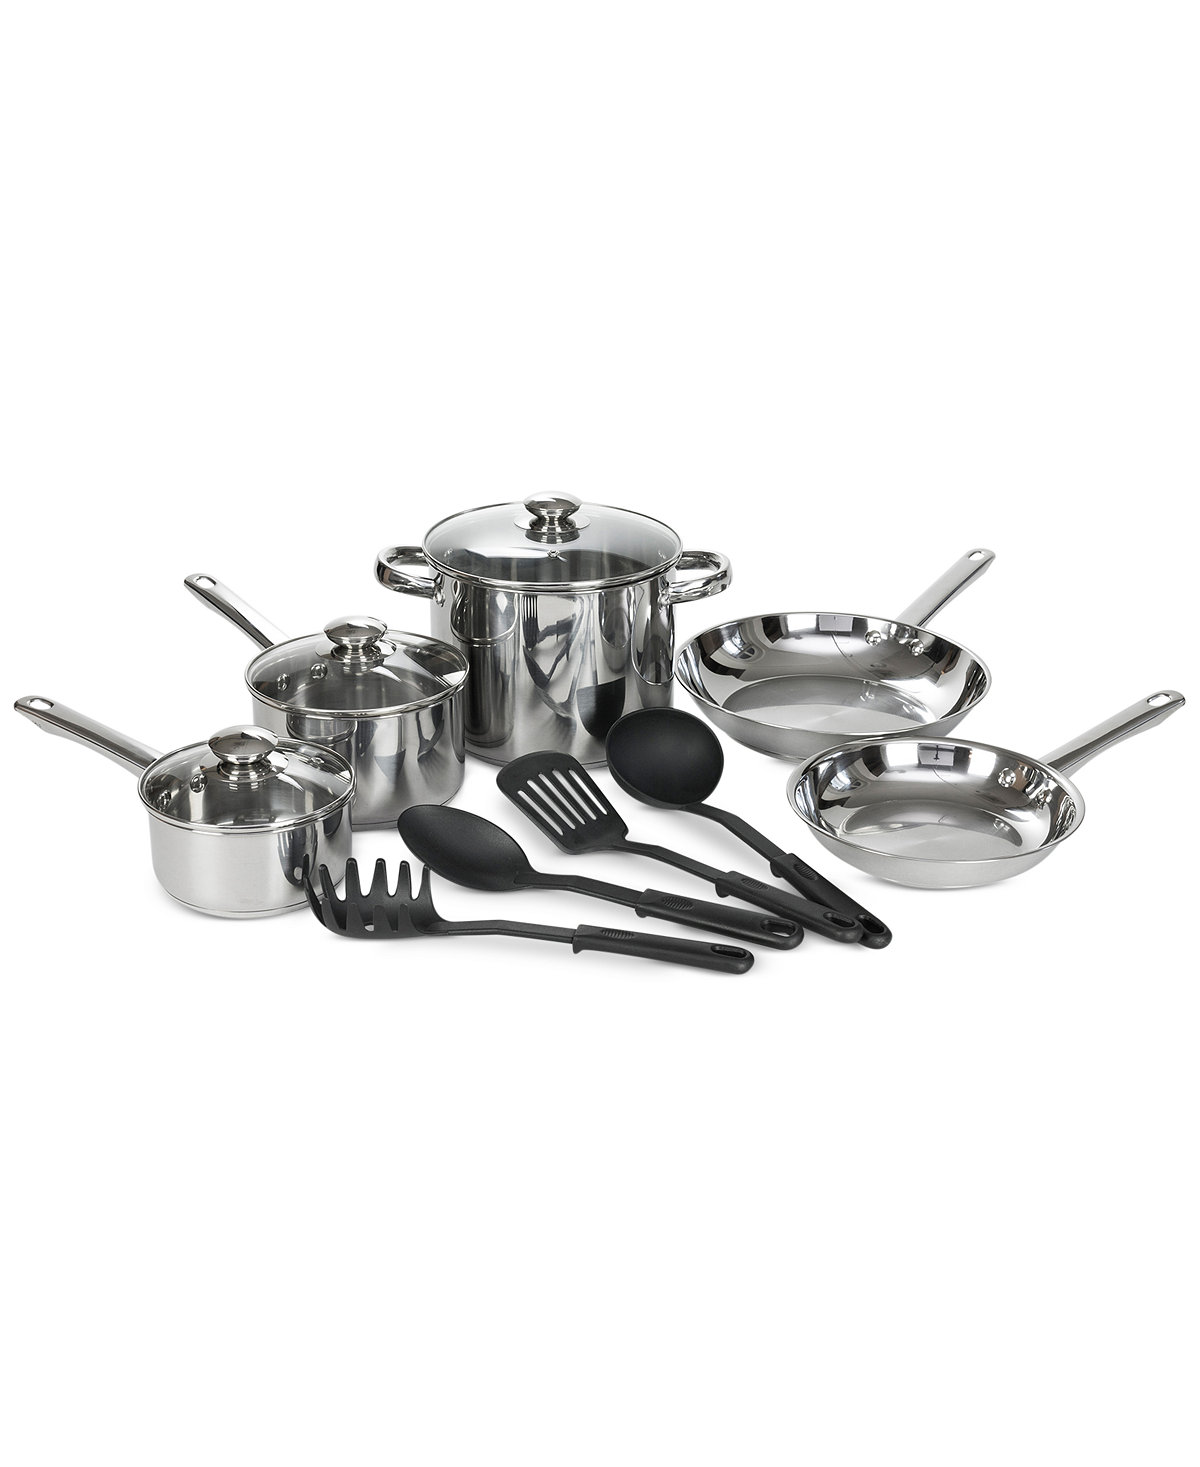 Price drop! Bella stainless steel 12-piece cookware set for $15